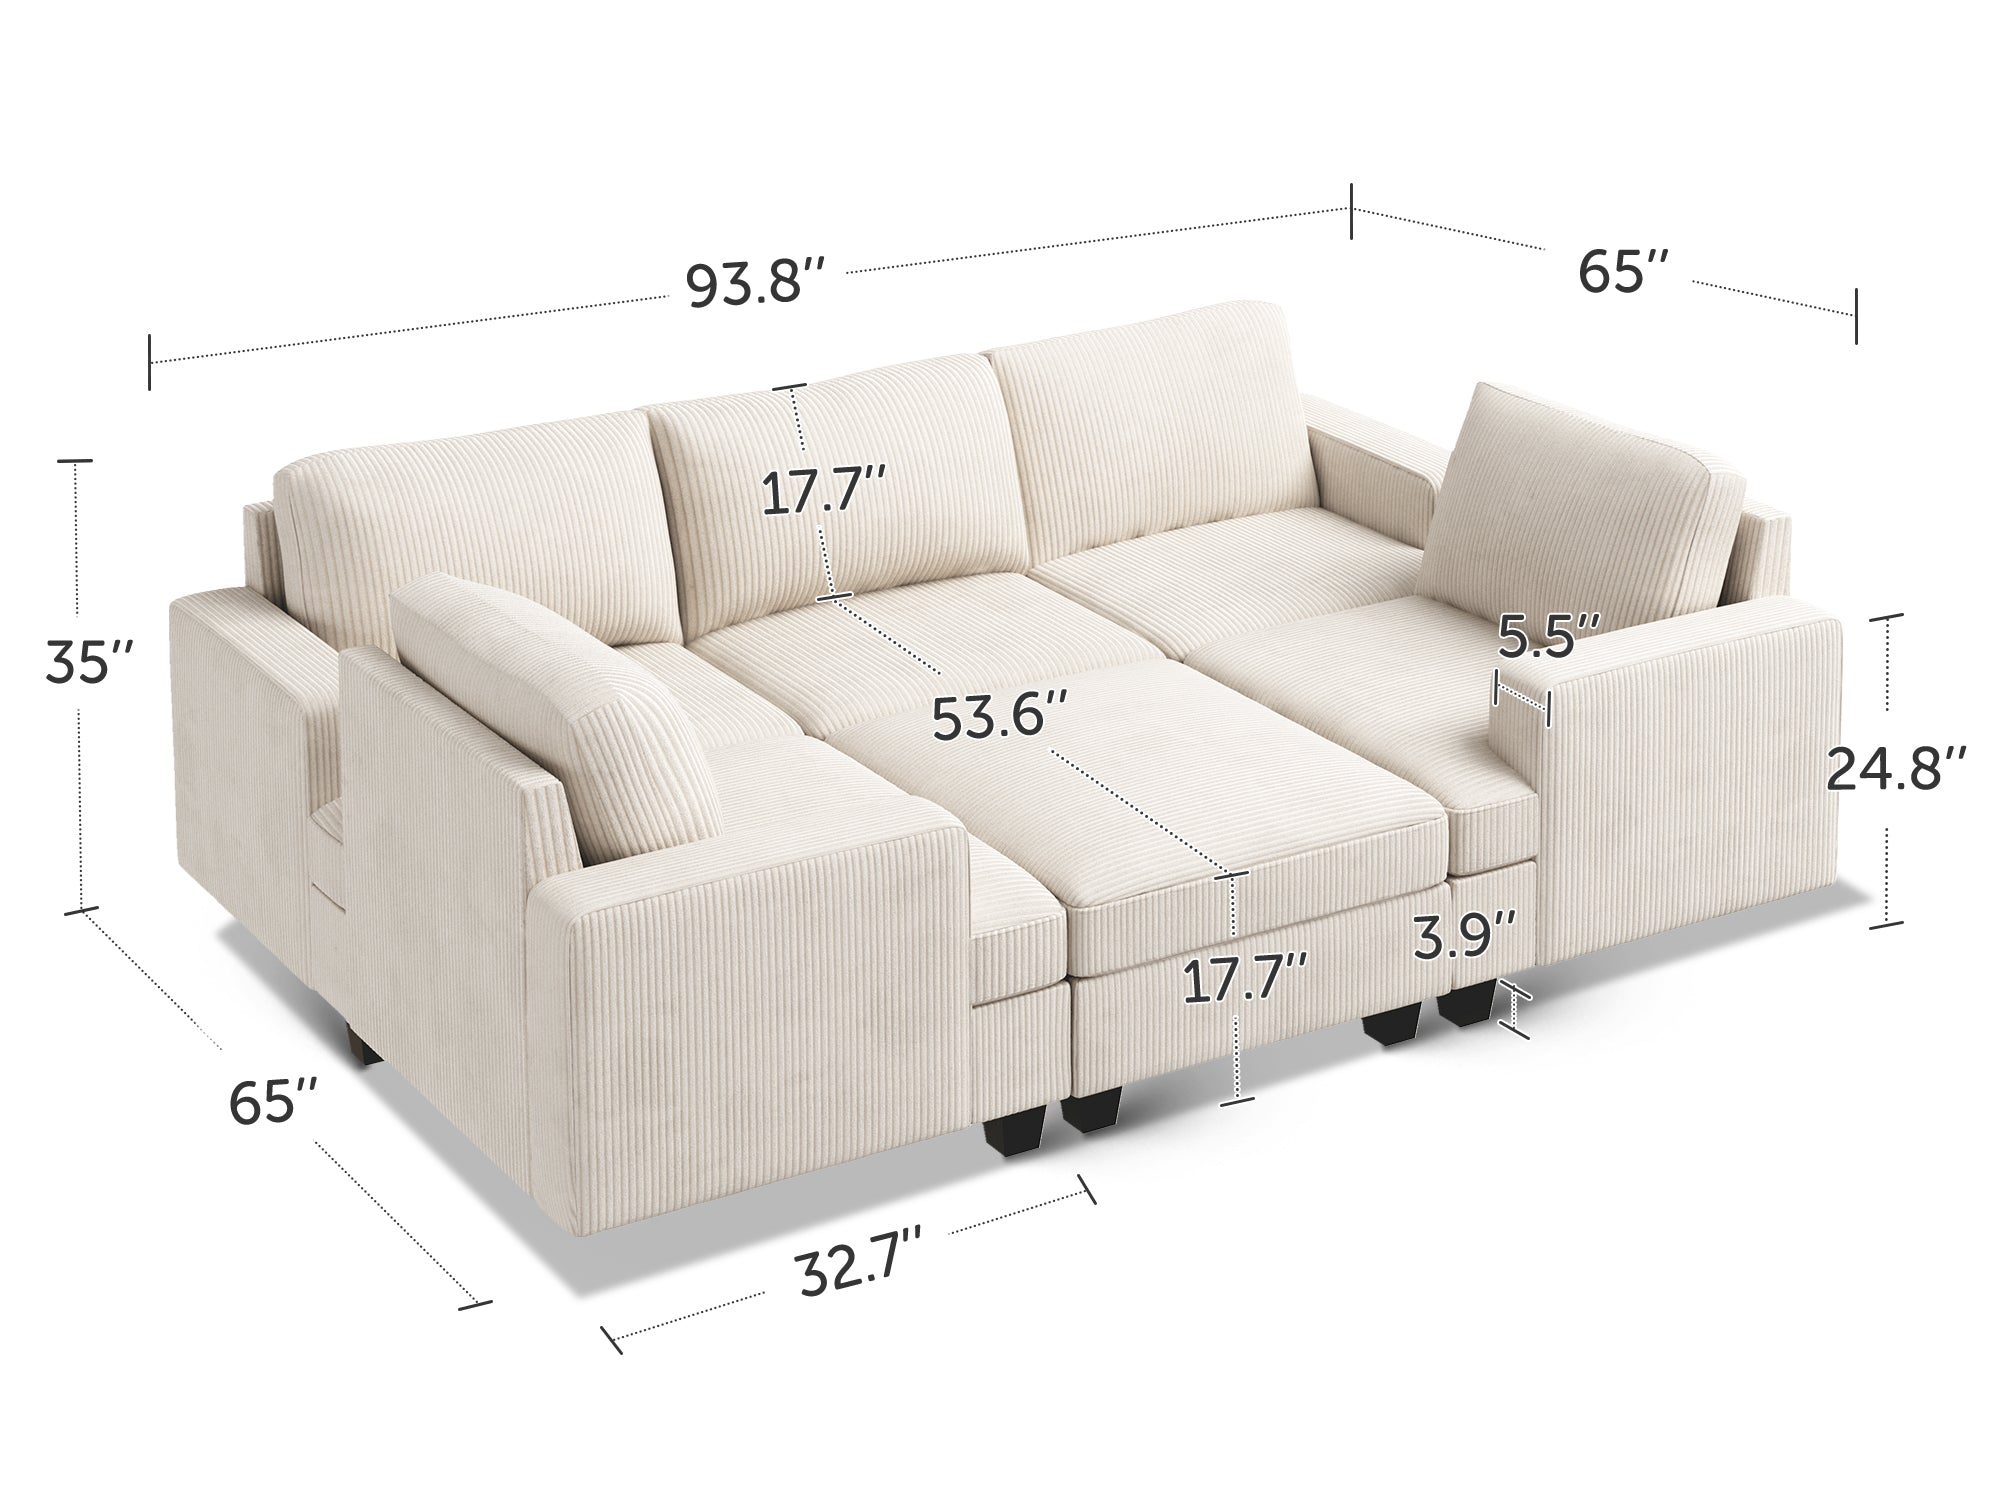 HONBAY 6-Piece Corduroy Modular Sleeper Lindyn Sectional With Storage Space #Color_Corduroy Beige